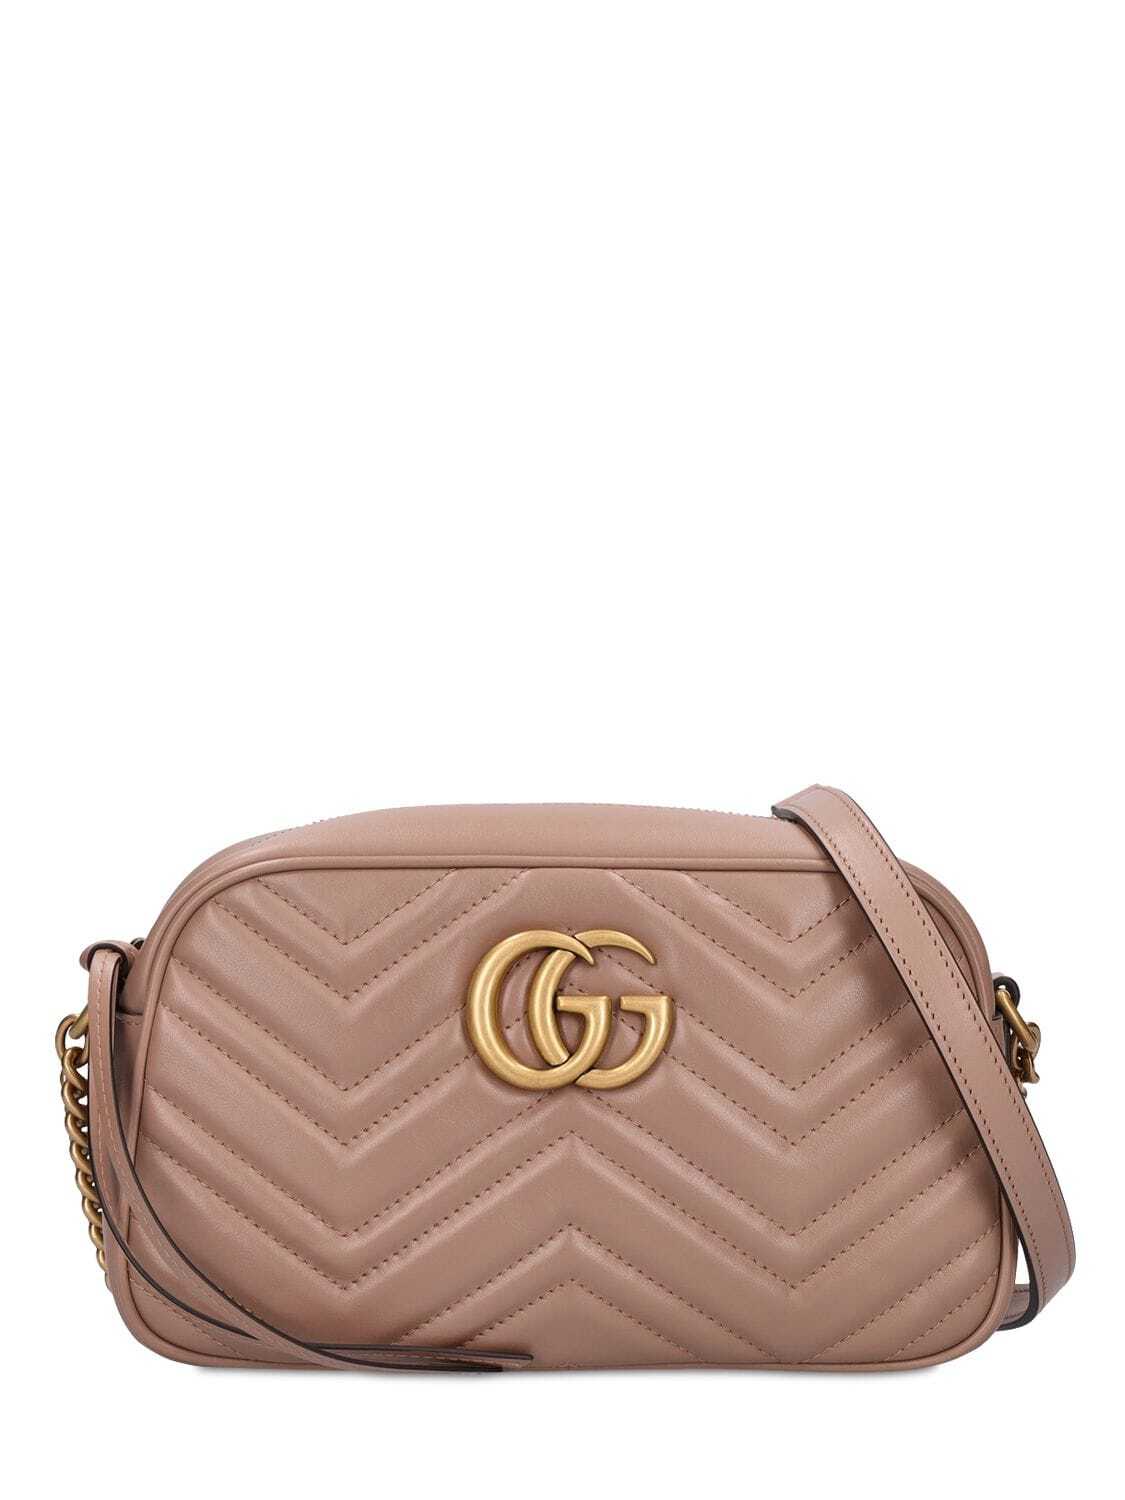 GUCCI Gg Marmont Leather Camera Bag in rose